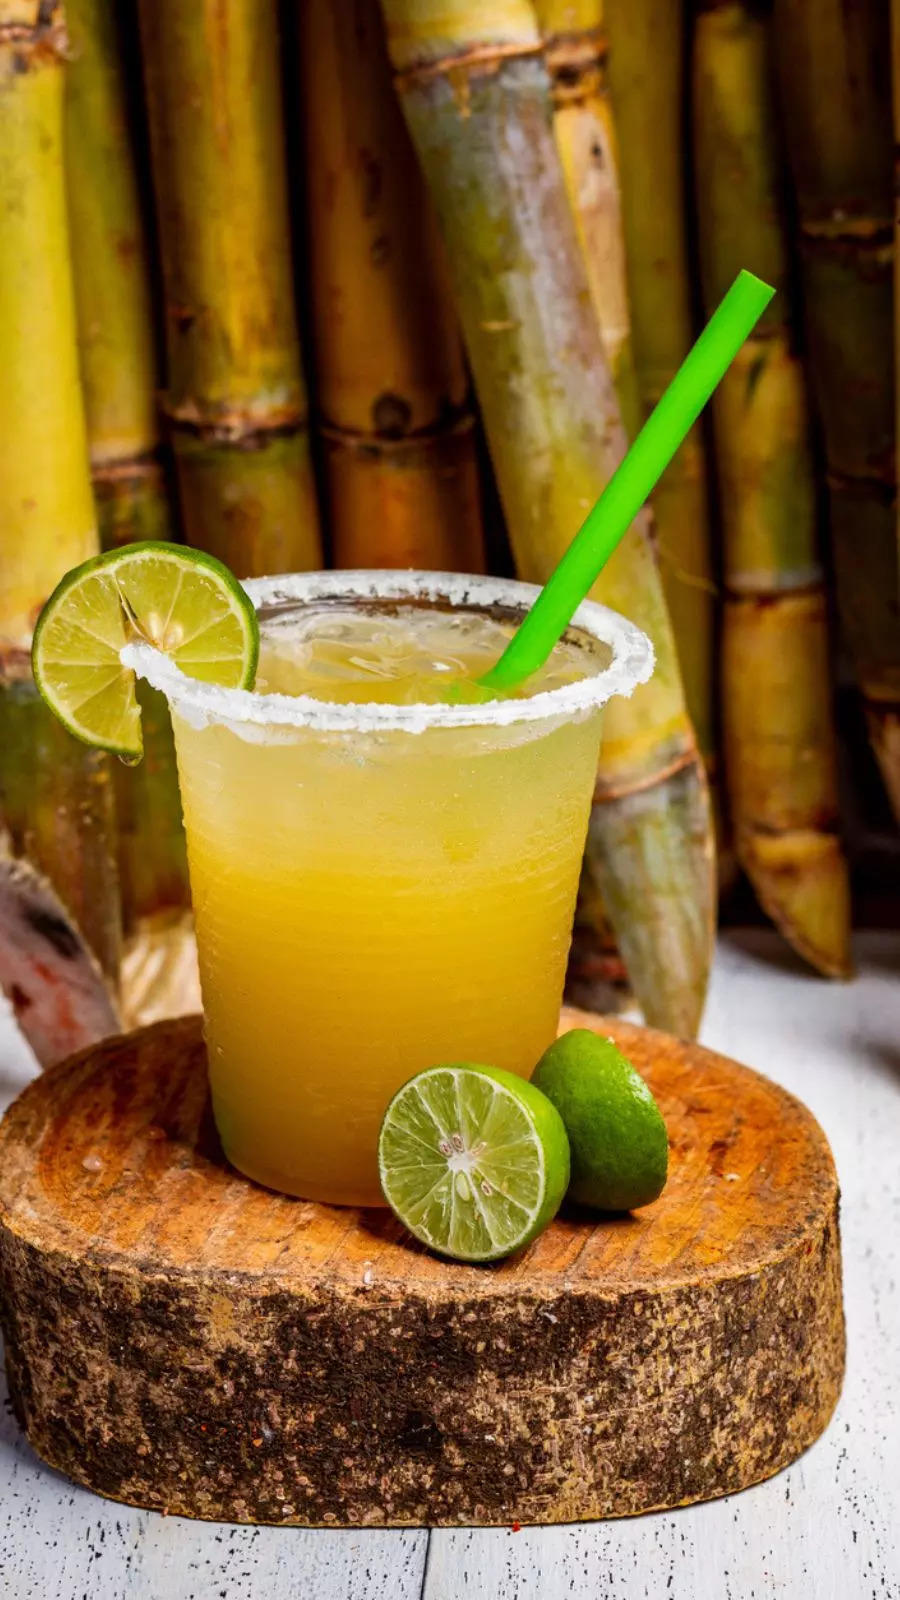 Weight loss, hydration, more: Reasons to drink sugarcane juice this summer 